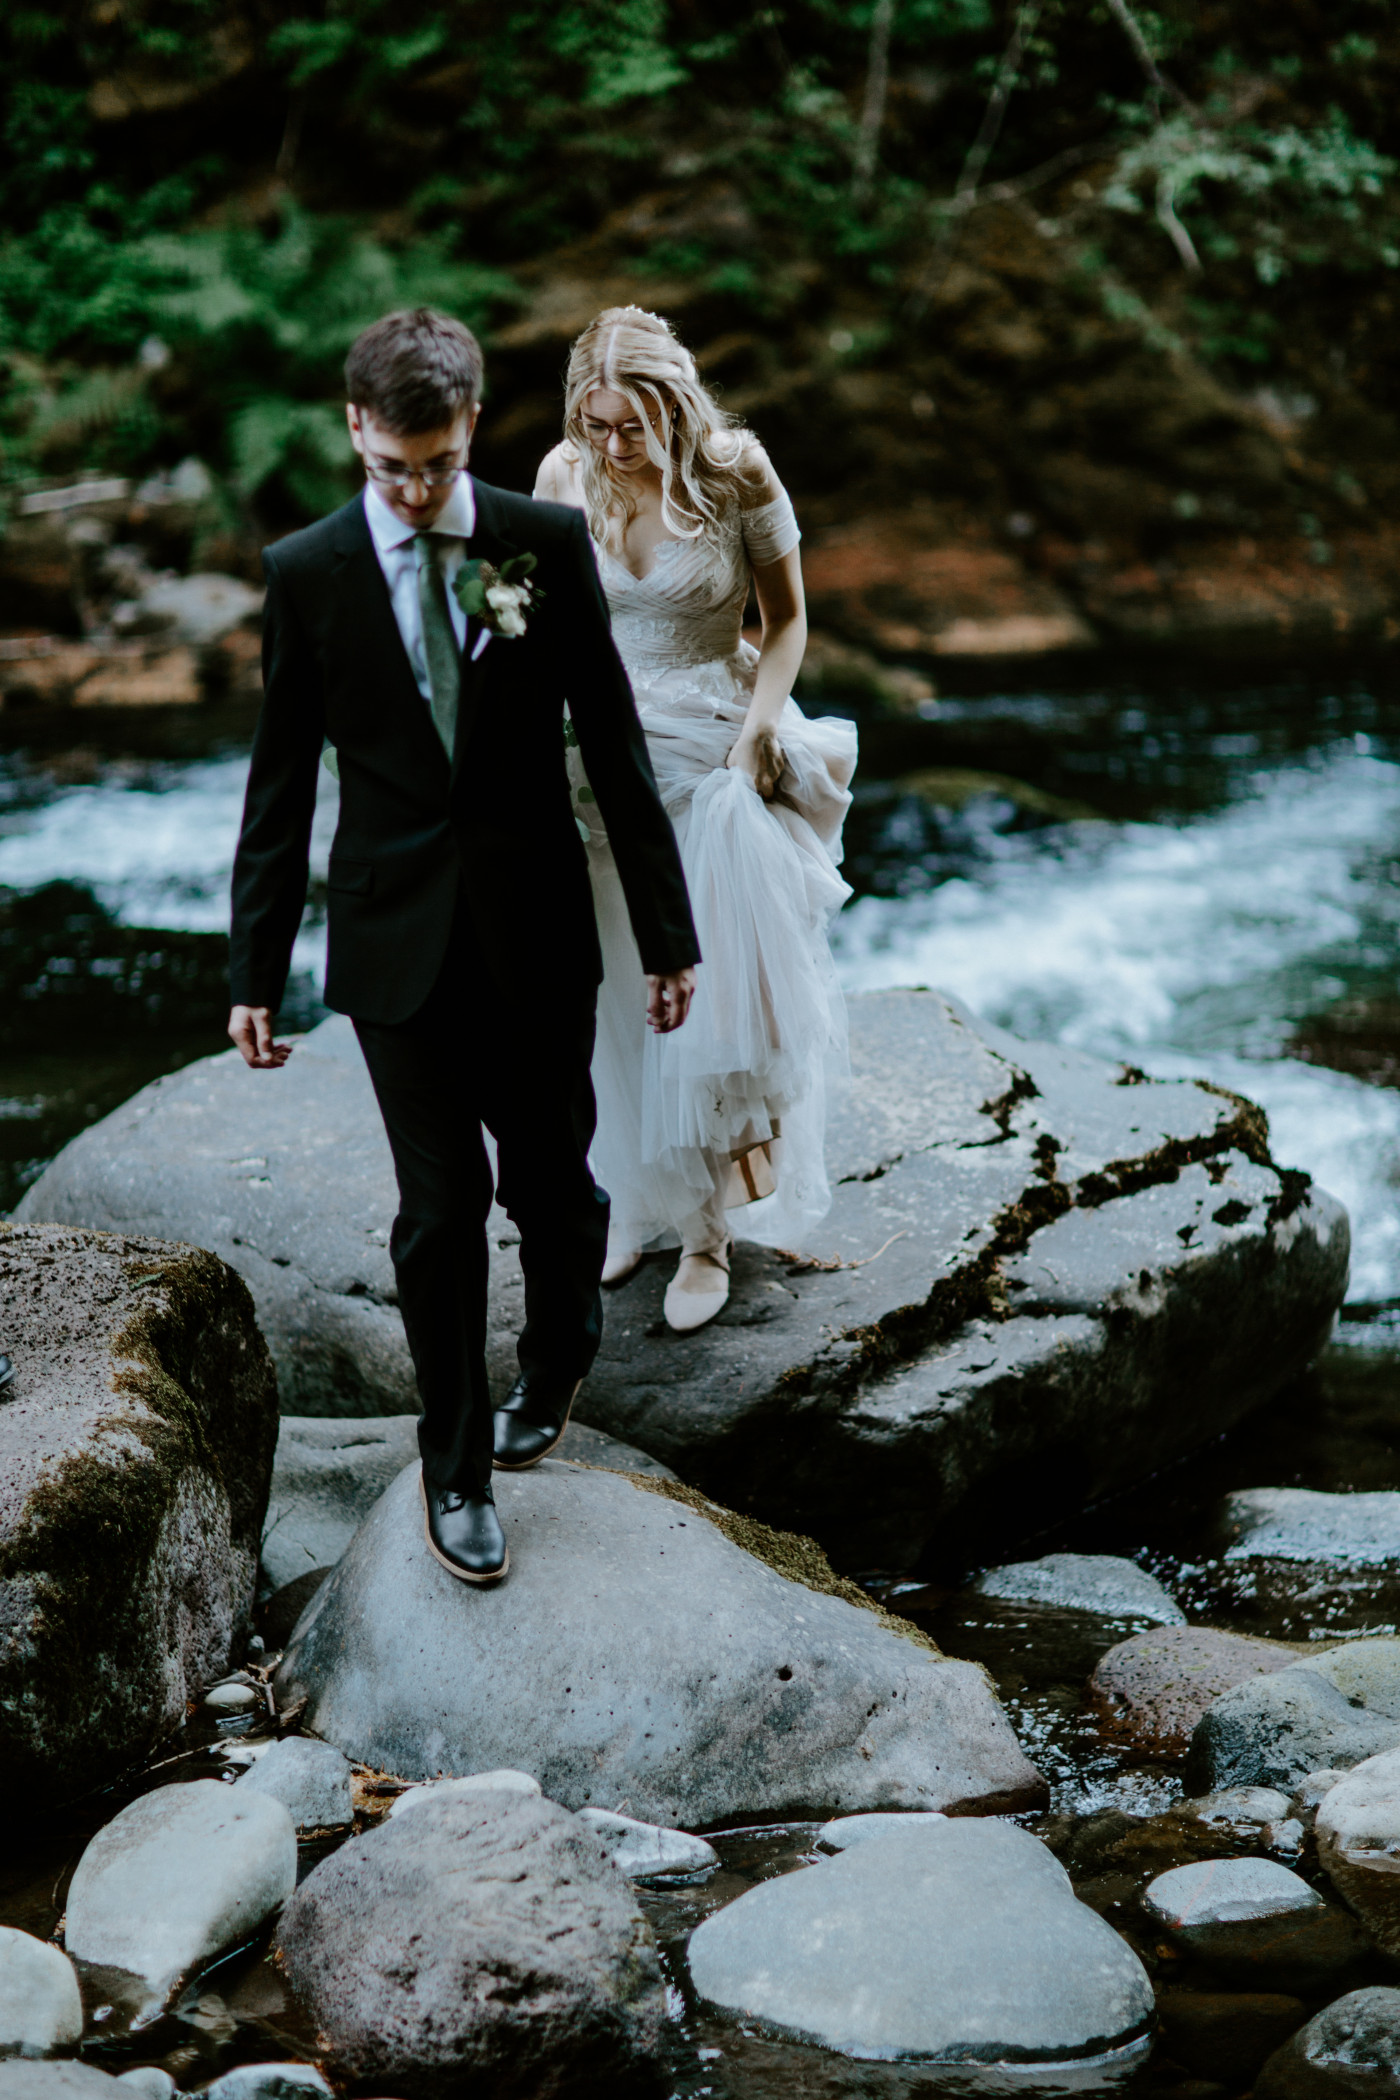 Kylie and Corey walk back across the rocks in the stream in Mount Hood National Forest.